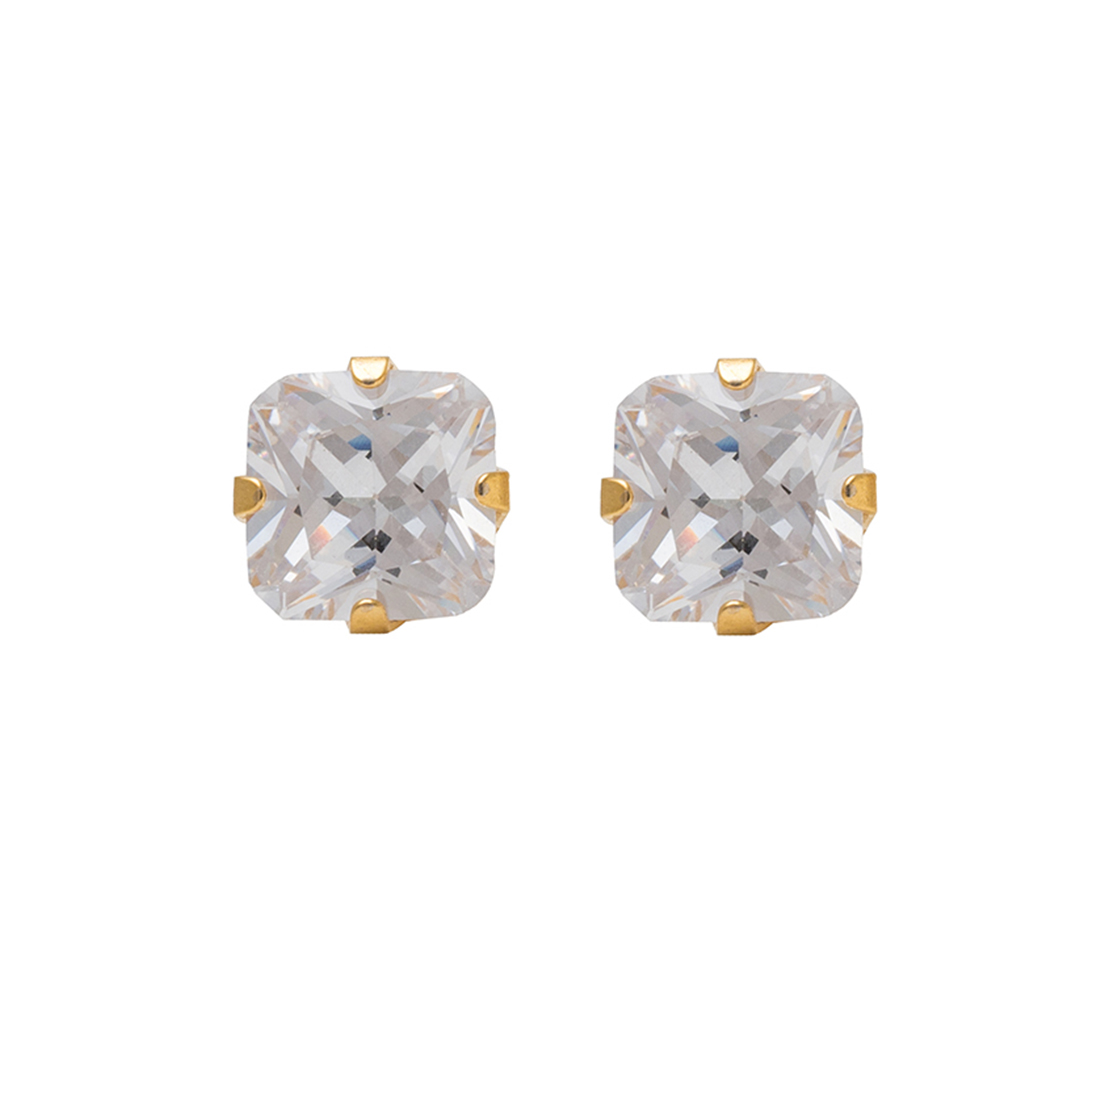 Earring Posts, 24K Gold Plated, Cubic Zirconia